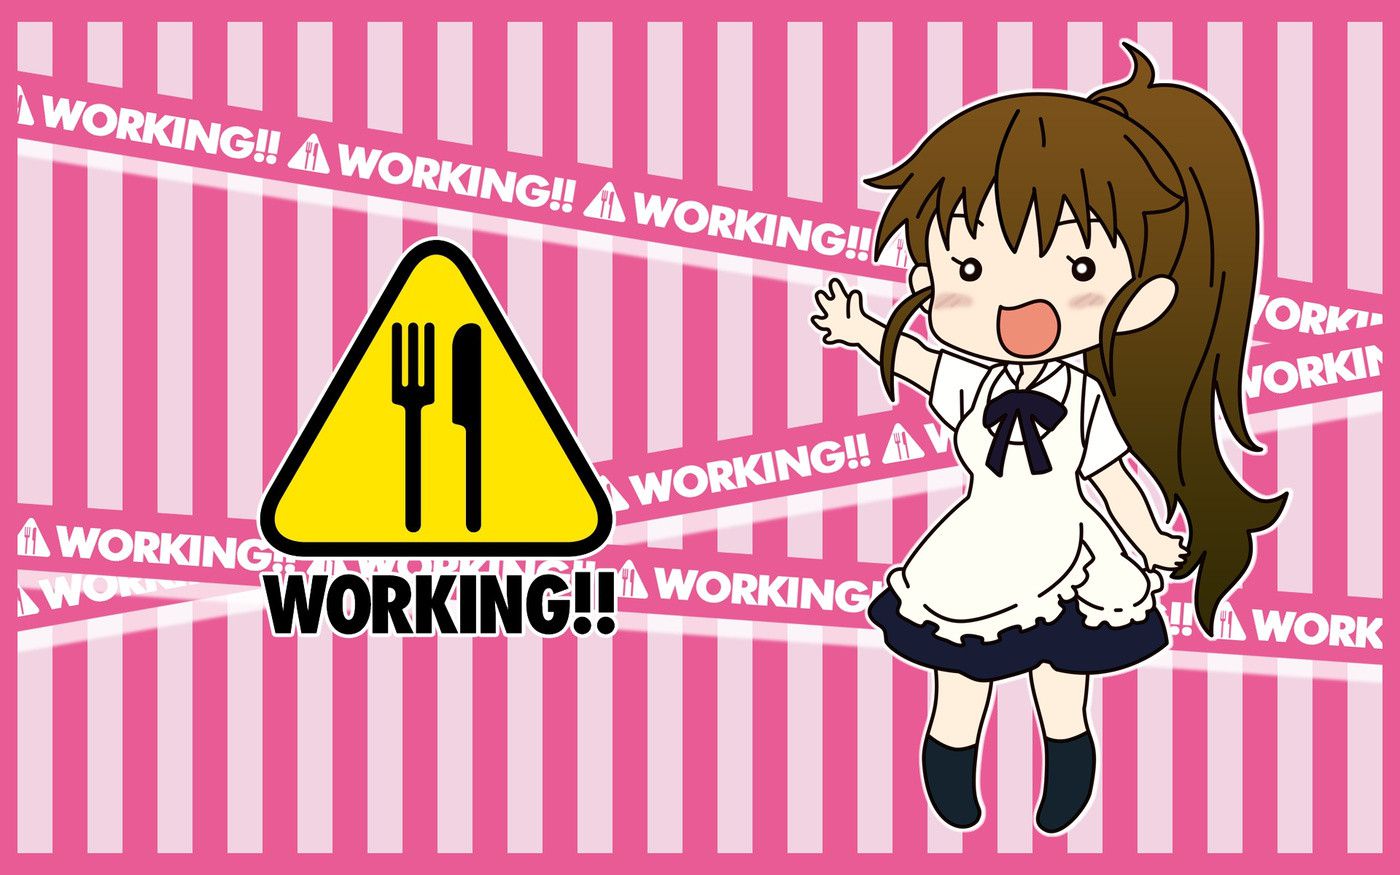 WORKING!! Wallpaper 02 [15 pictures] 12